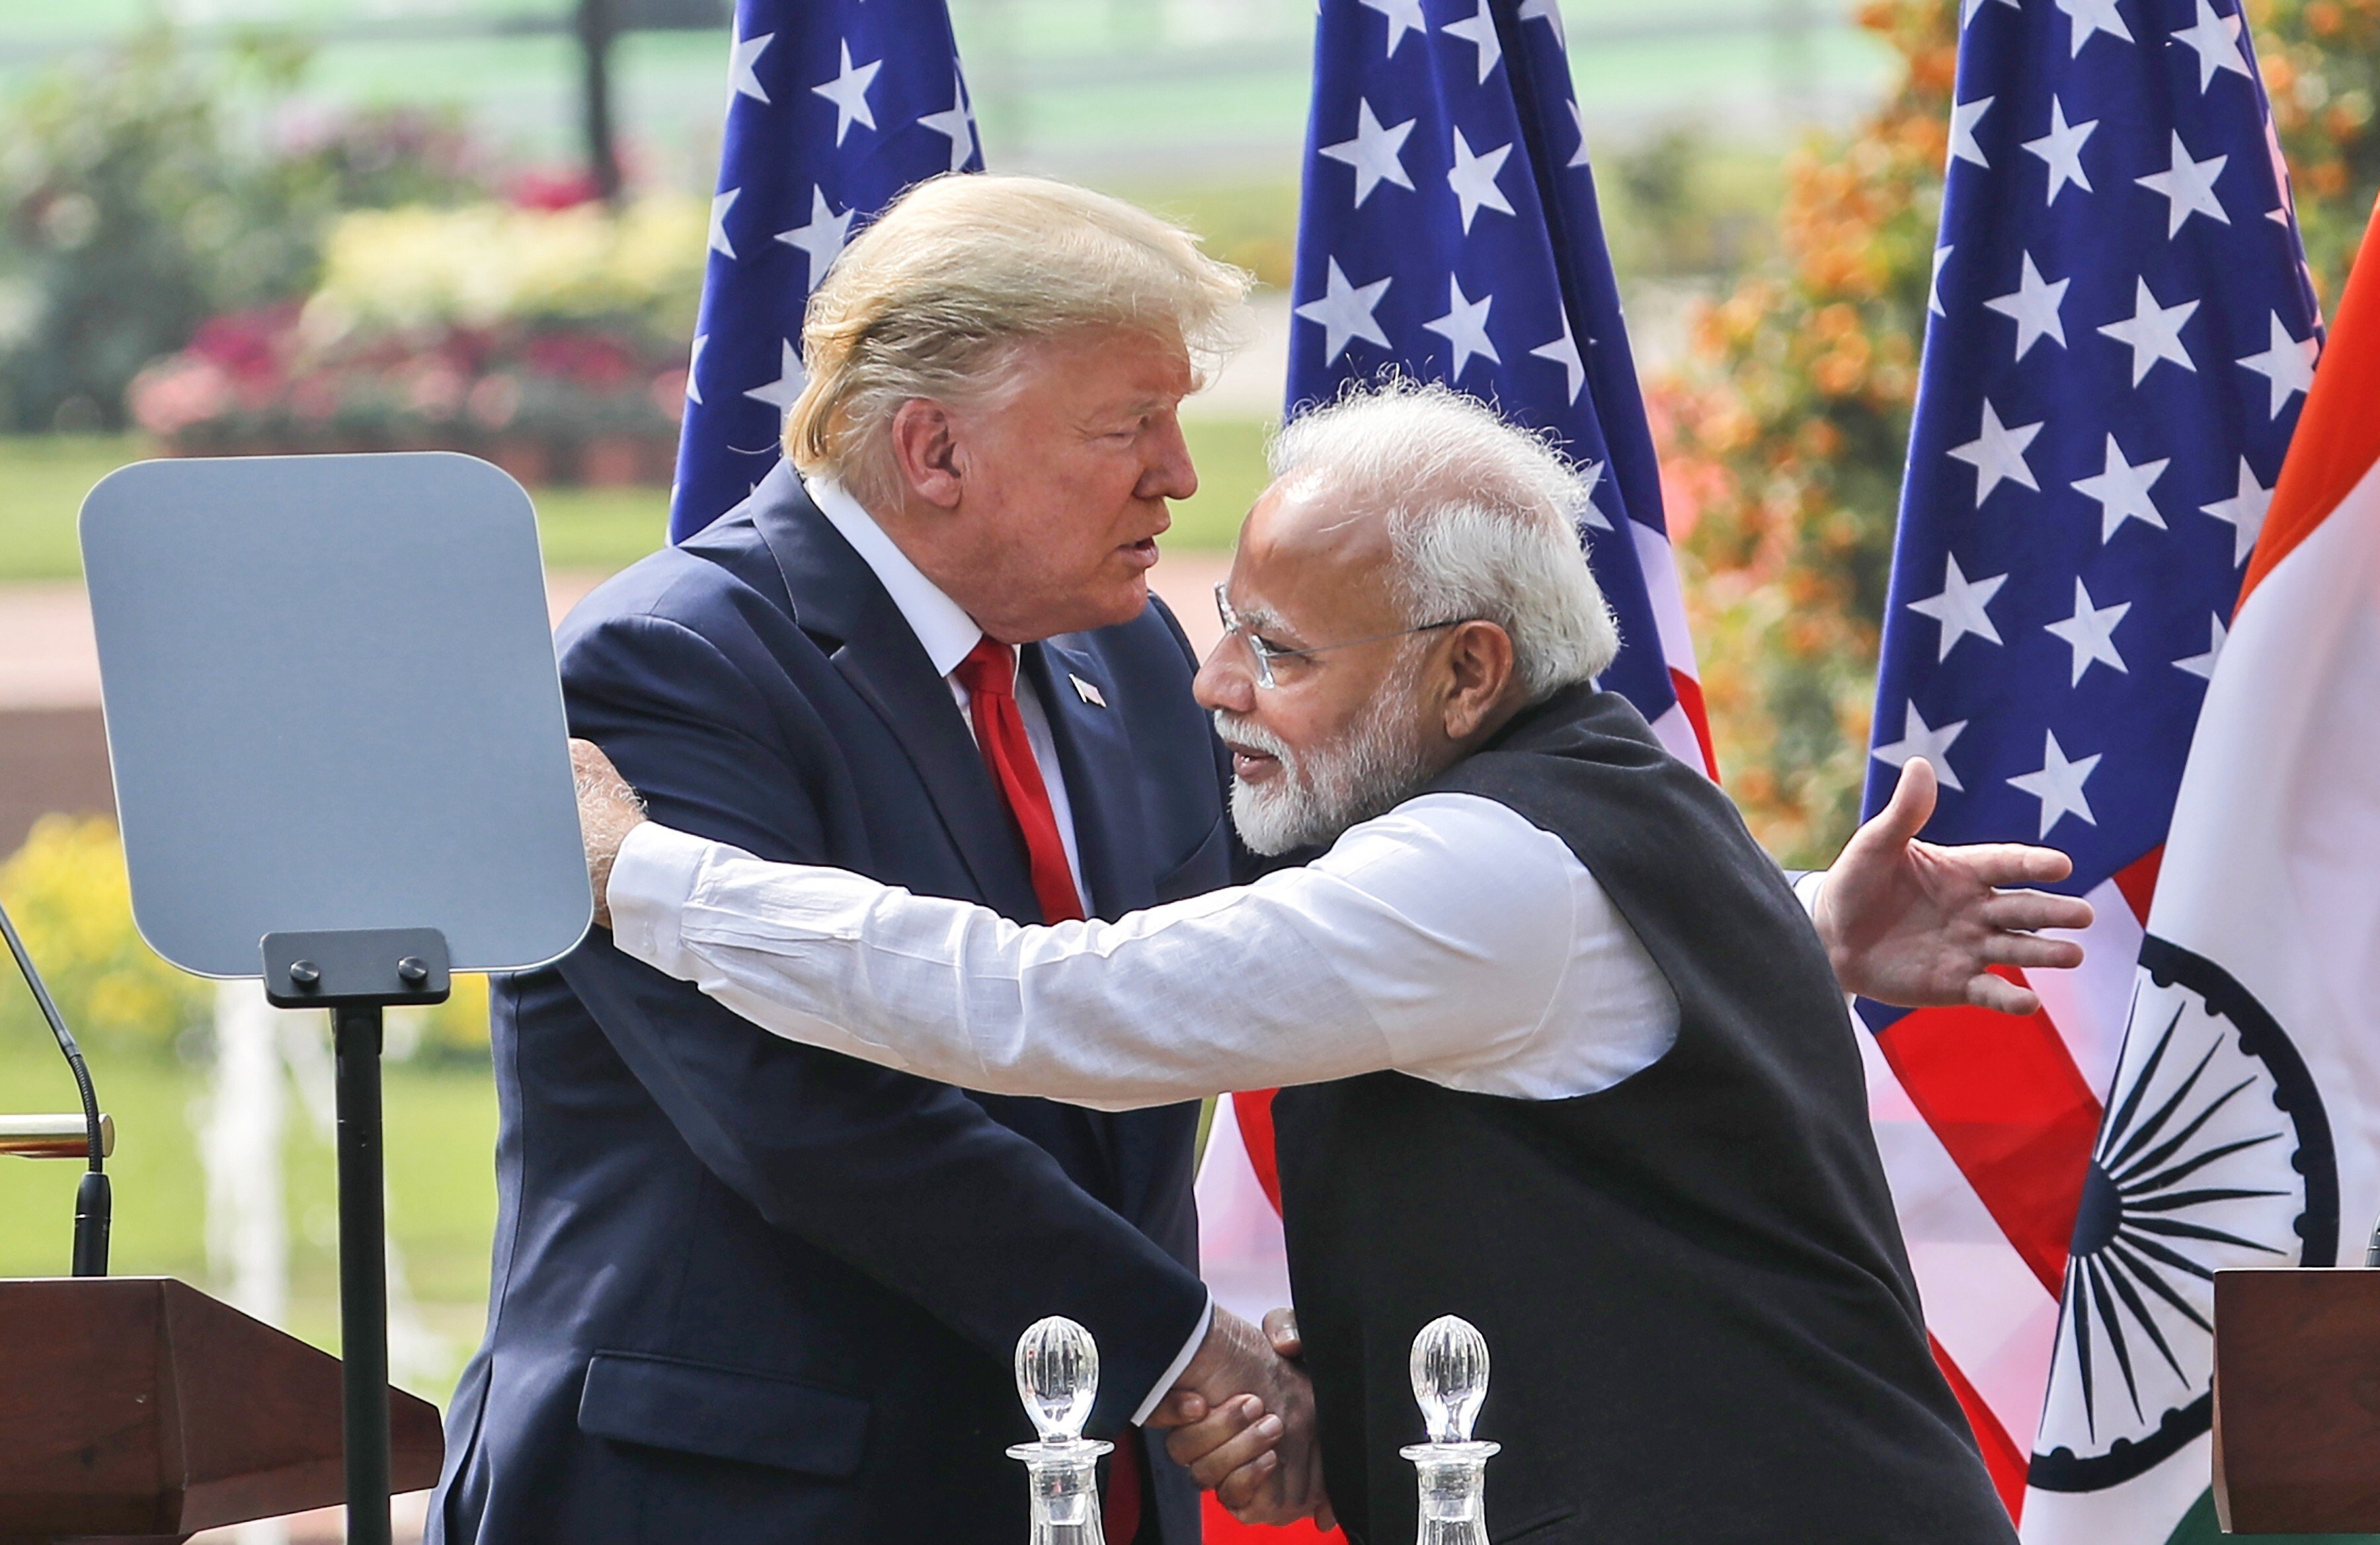 Then US president Donald Trump and Indian Prime Minister Narendra Modi embrace after giving a joint statement in New Delhi on February 25, 2020. Photo: AP